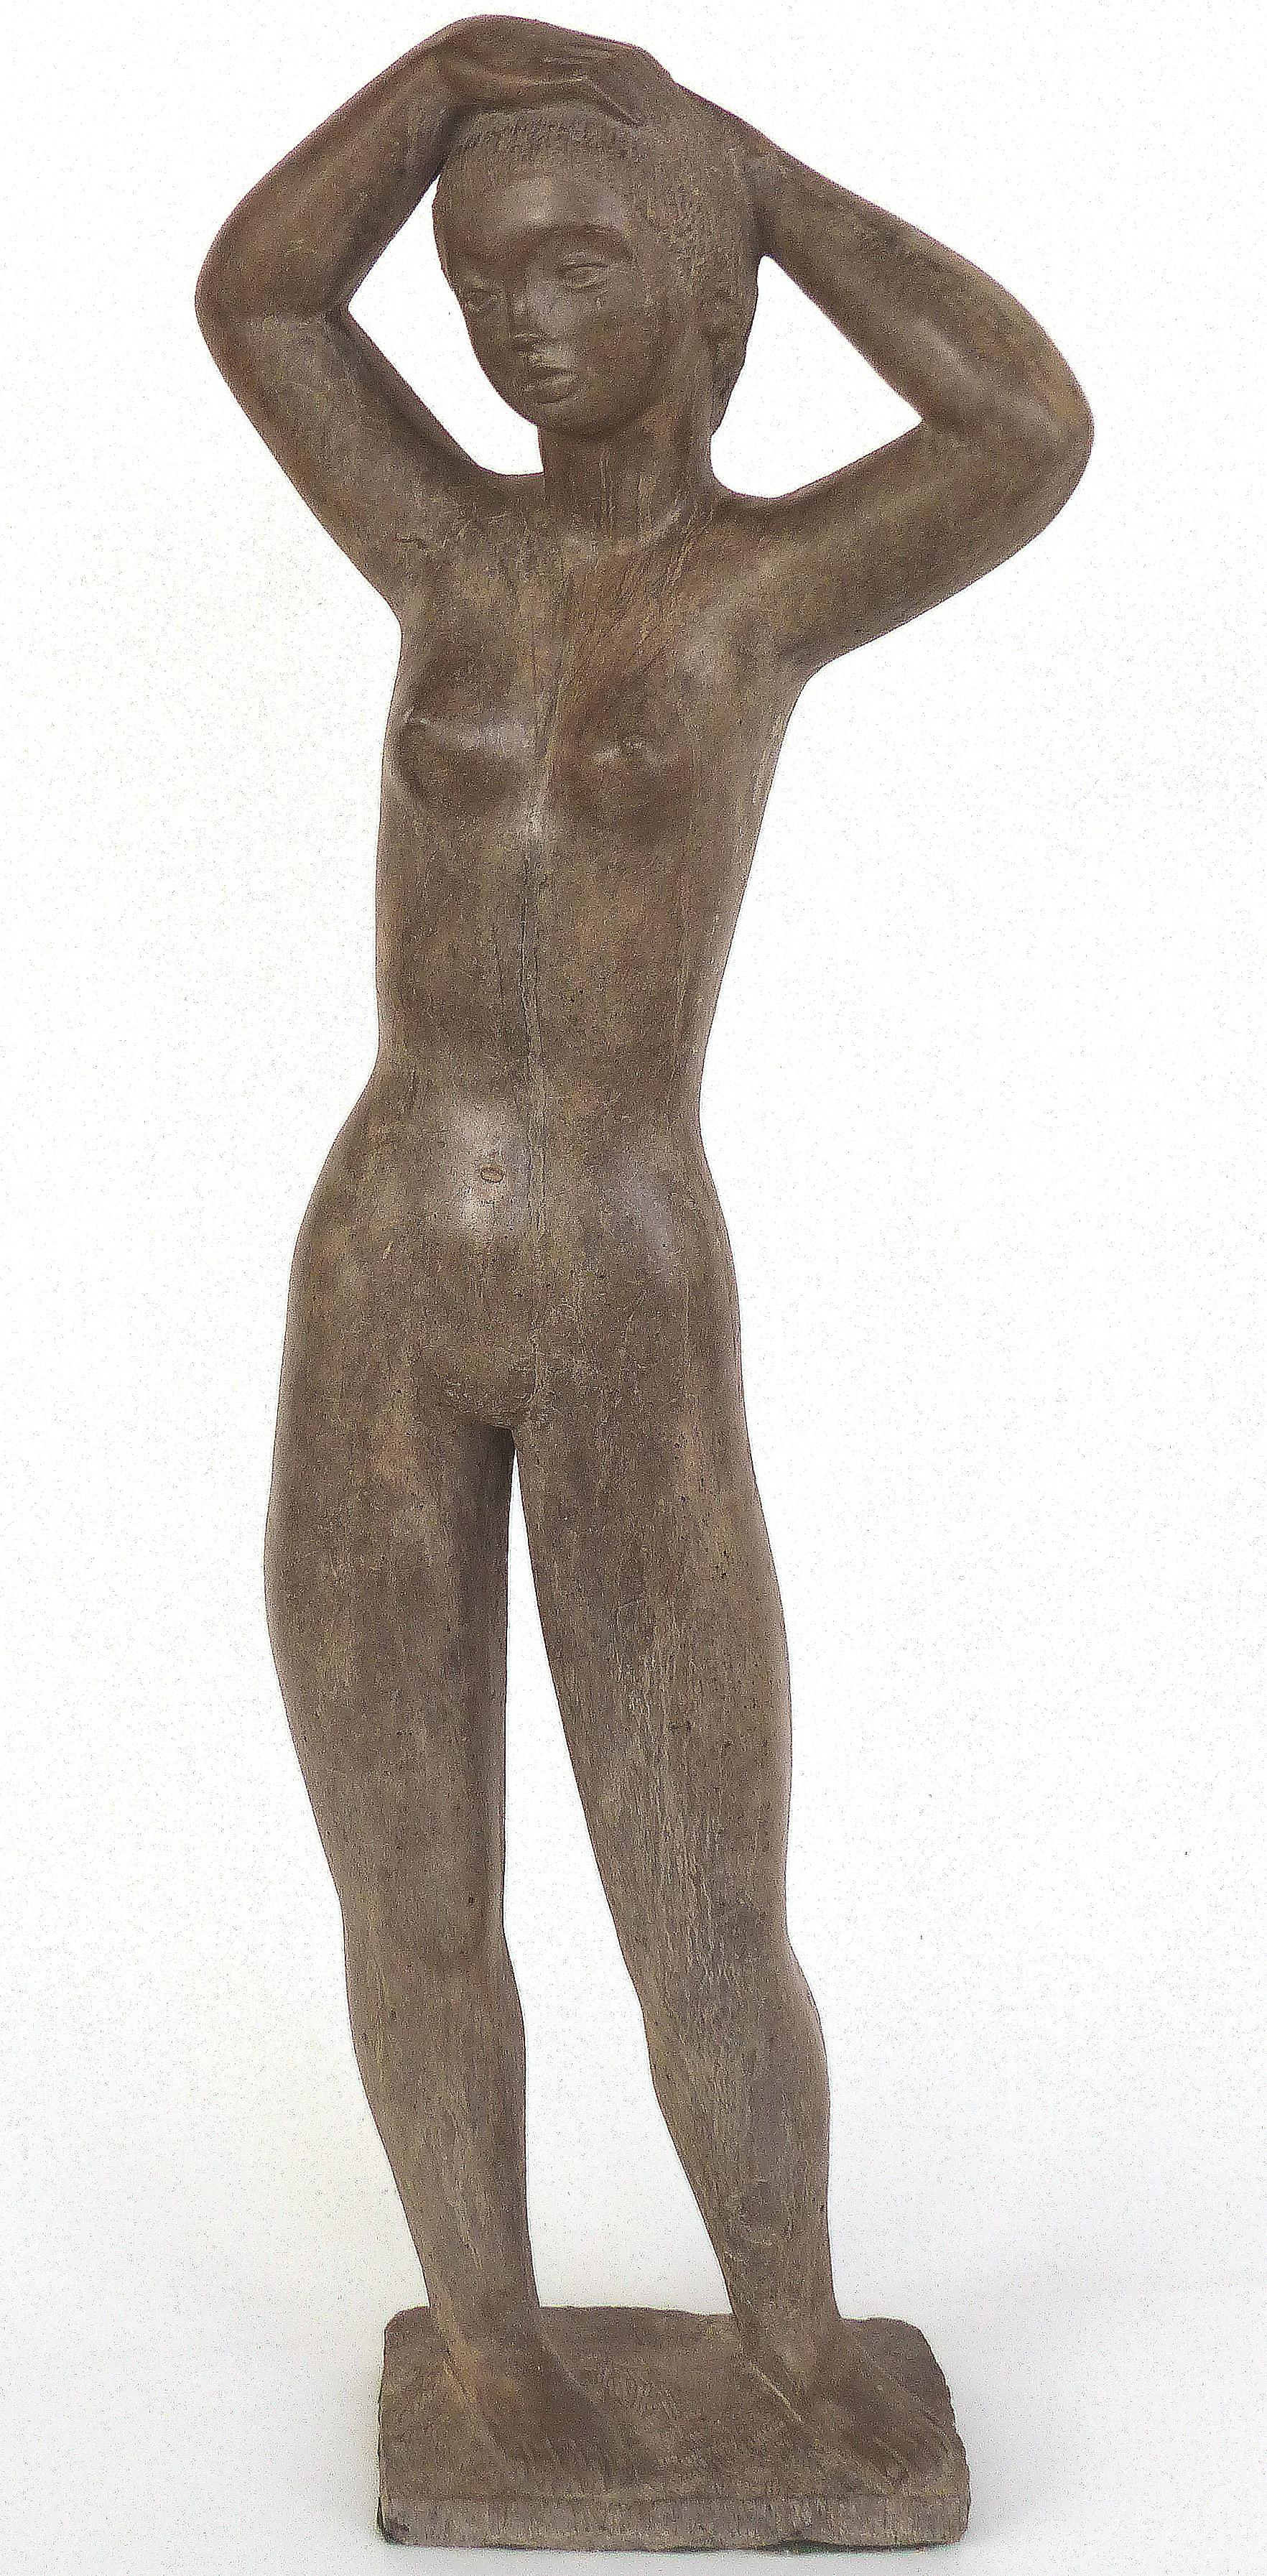 Offered for sale is a large and important cast composition sculpture of a standing nude by American artist Chuck Dodson, circa 1975.
Dodson was an architect turned sculptor that was a resident artist at the Grove House in Coconut Grove, FL. His